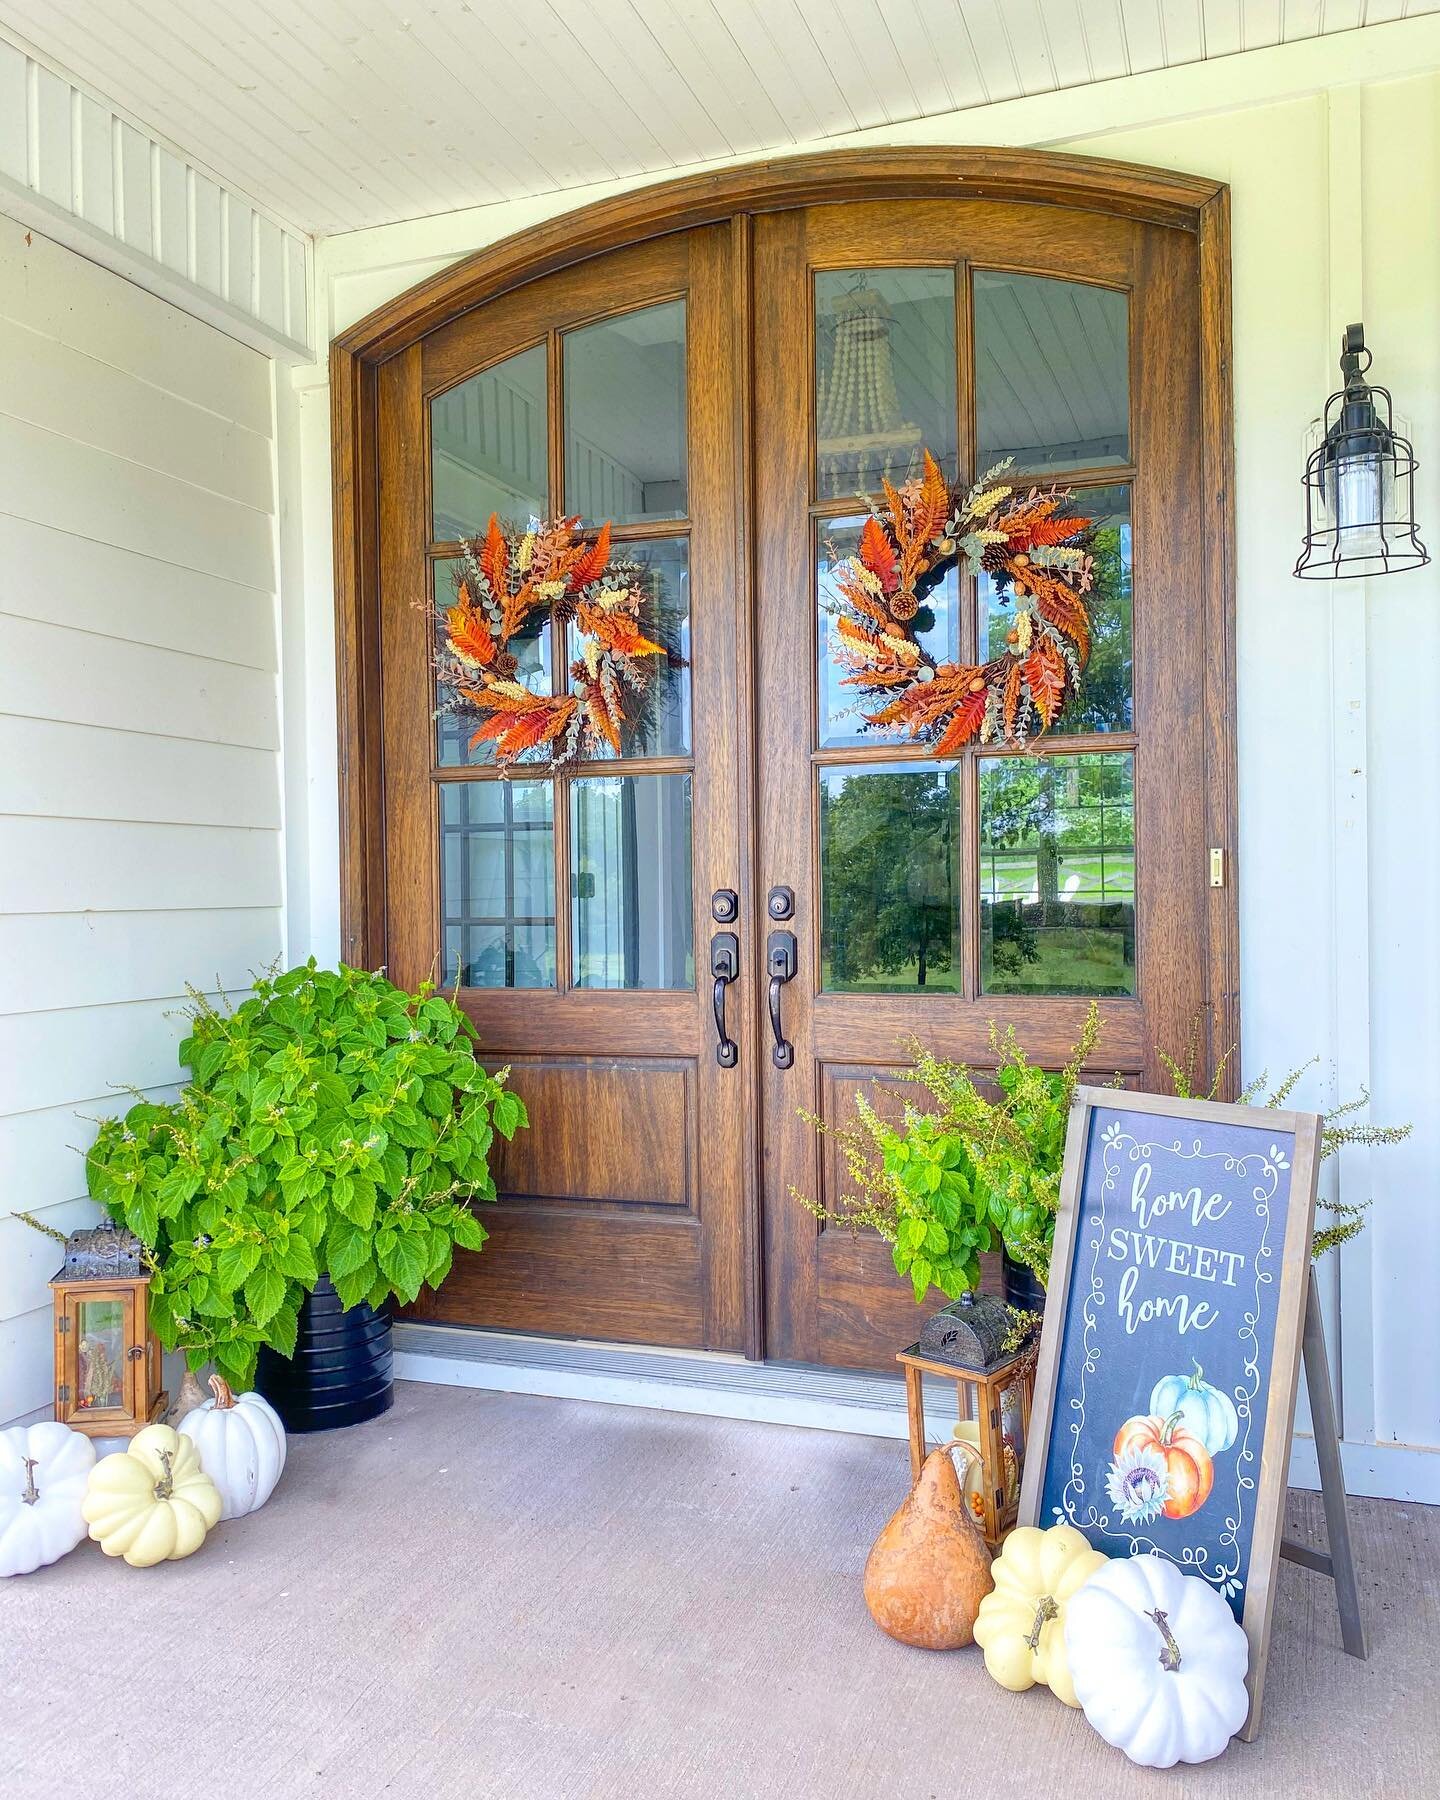 Fall is slowly making its way to Crate and Cottage. I added a few touches to the front porch today as I transition from summer to fall. So thankful for @kirklands #ad for helping me spruce up the front doors with these beautiful fall wreaths. @Kirkla